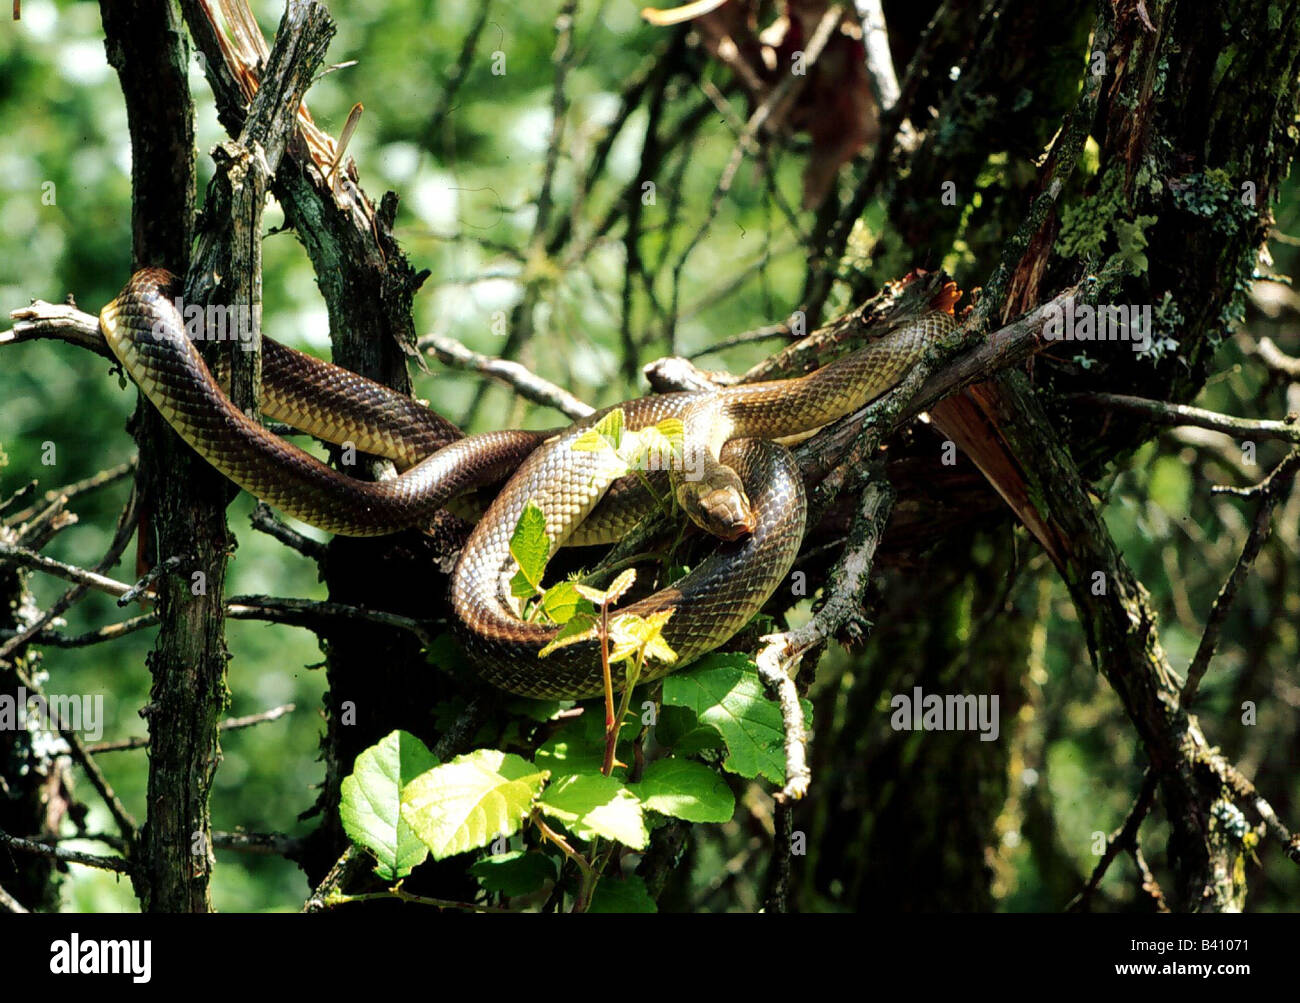 zoology / animals, reptiles, snakes, Aesculapian Snake, (Elaphe longissima), in bough on tree, distribution: Southern Europe, Ca Stock Photo